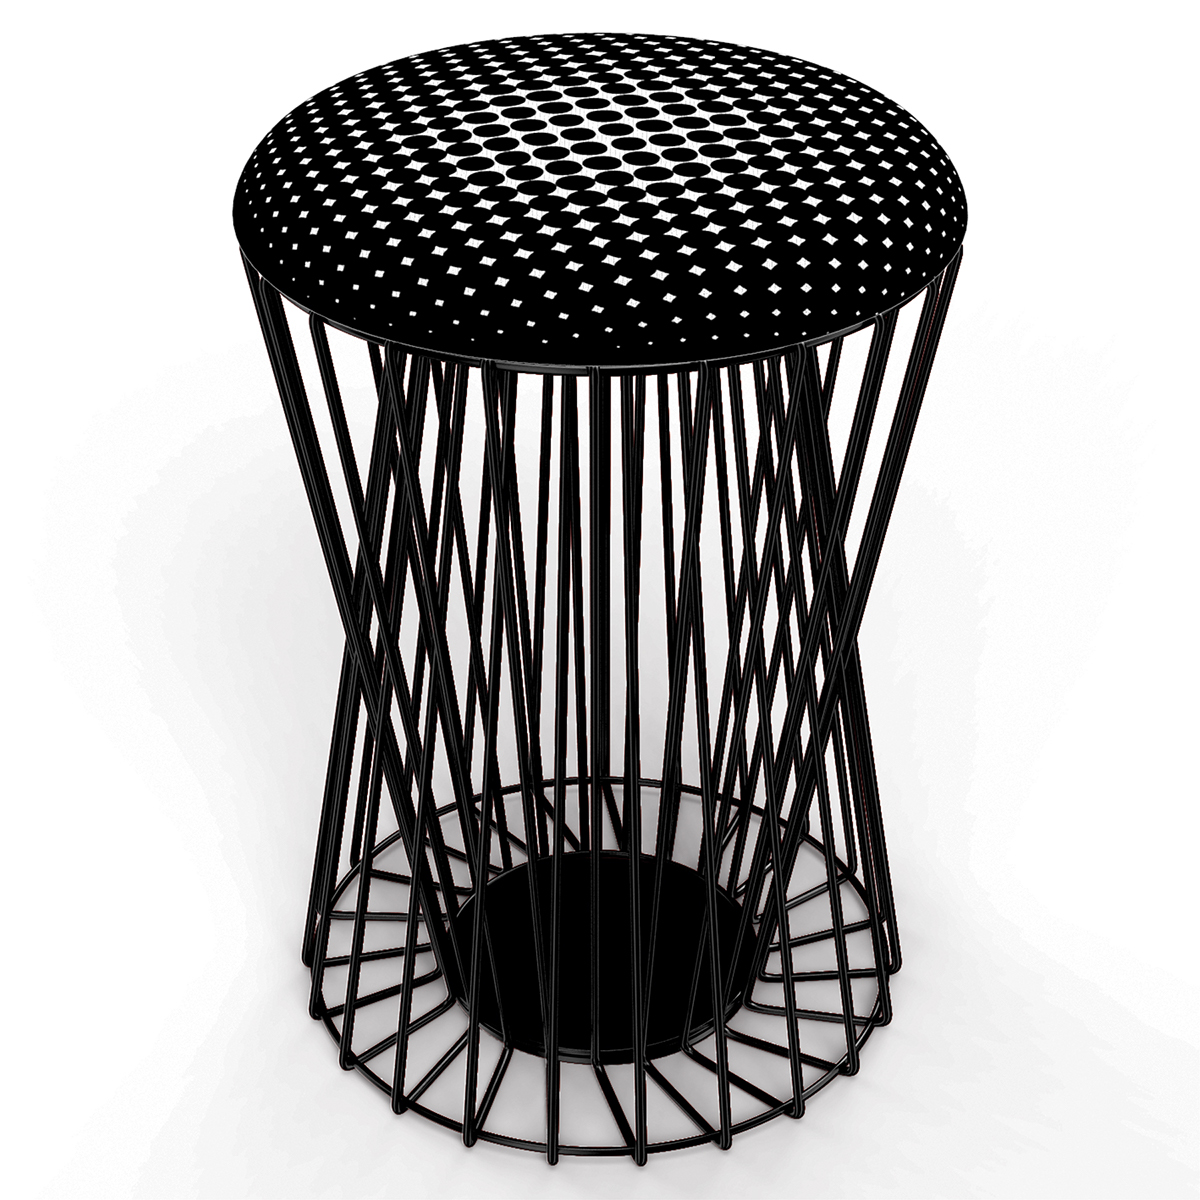 xcent  cool sitting side table stool vibrant cafe boutique magnetic seat Young Style detail clean pattern India